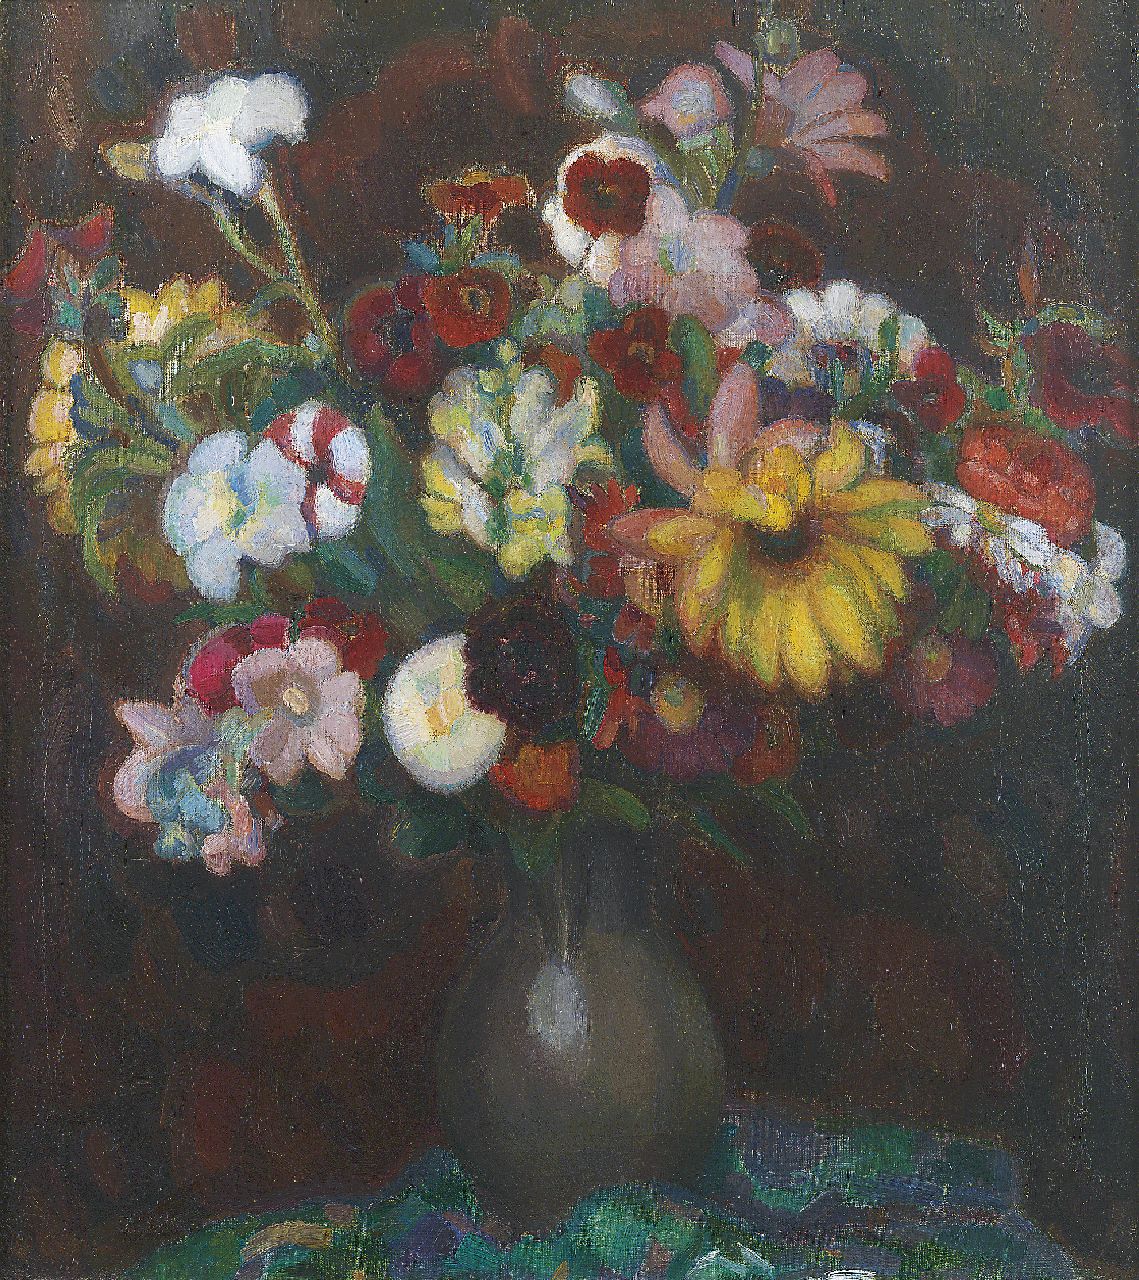 Gestel L.  | Leendert 'Leo' Gestel, Flowers in a tin jug, oil on canvas 70.5 x 63.0 cm, signed l.l. and painted in 1915-1917